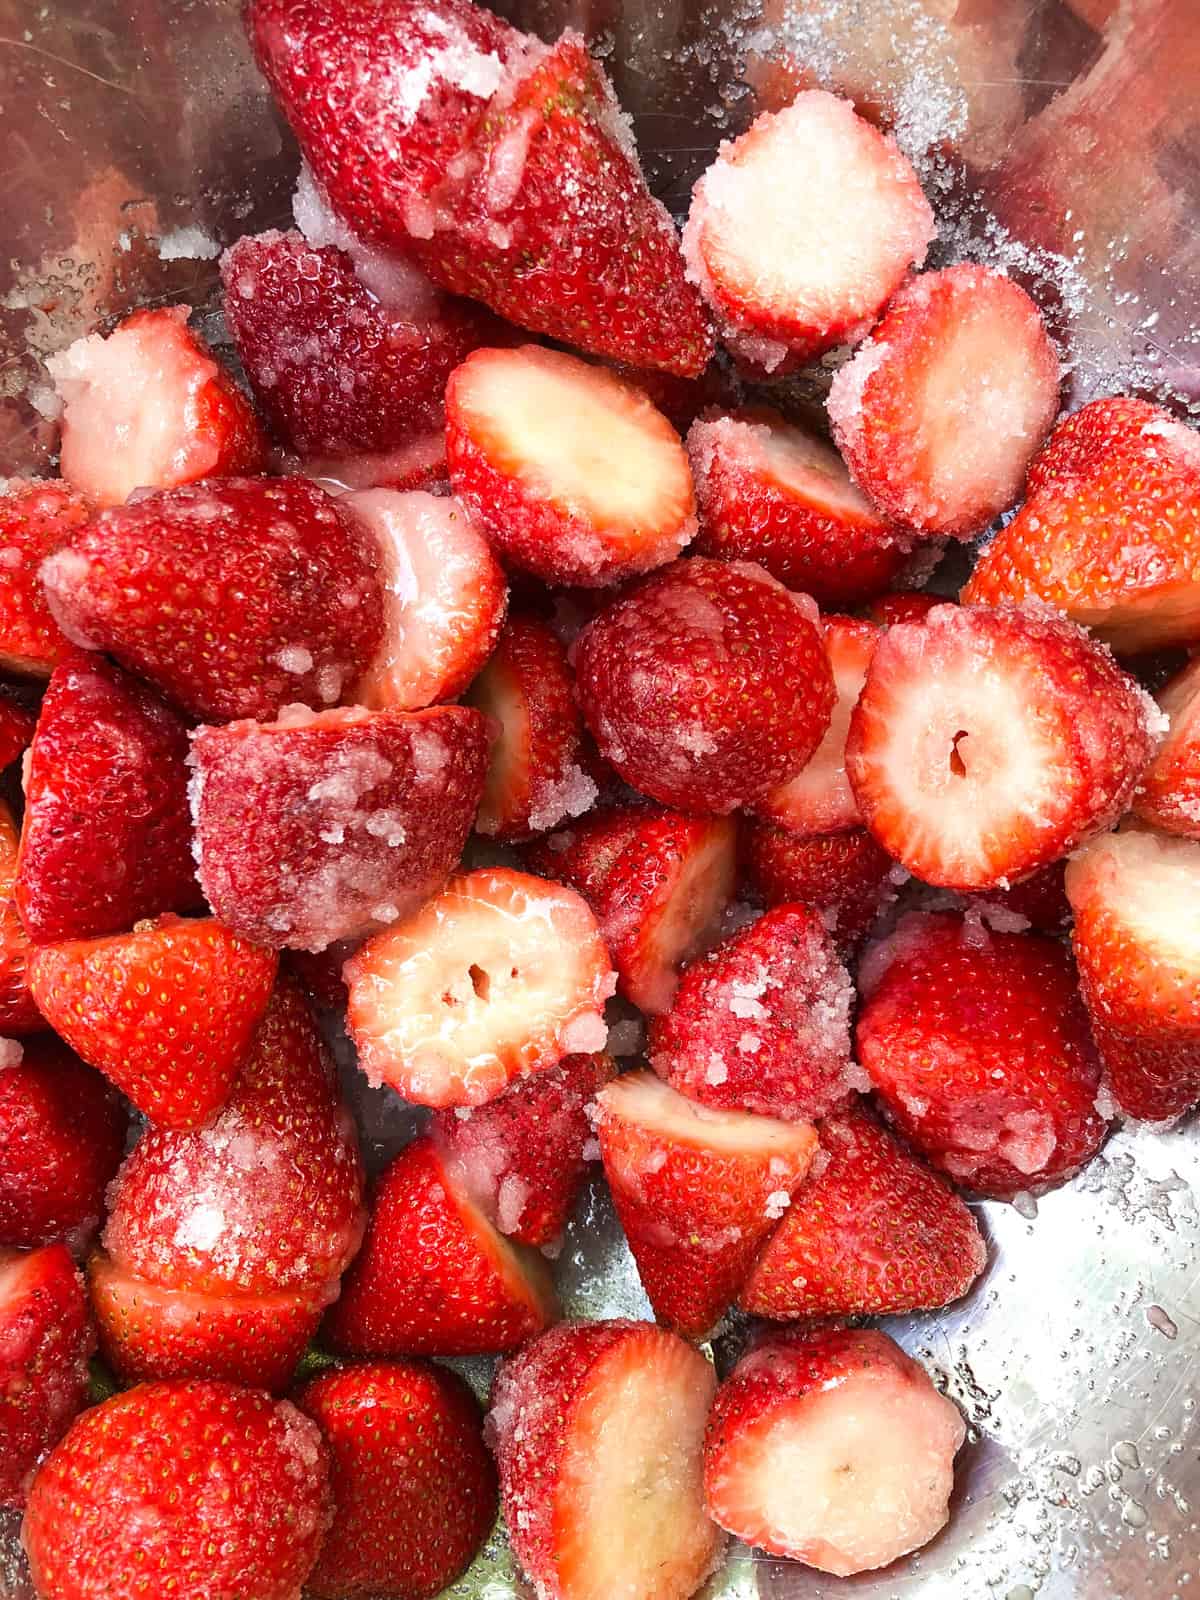 Place the strawberries in the fridge for a few hours to macerate.